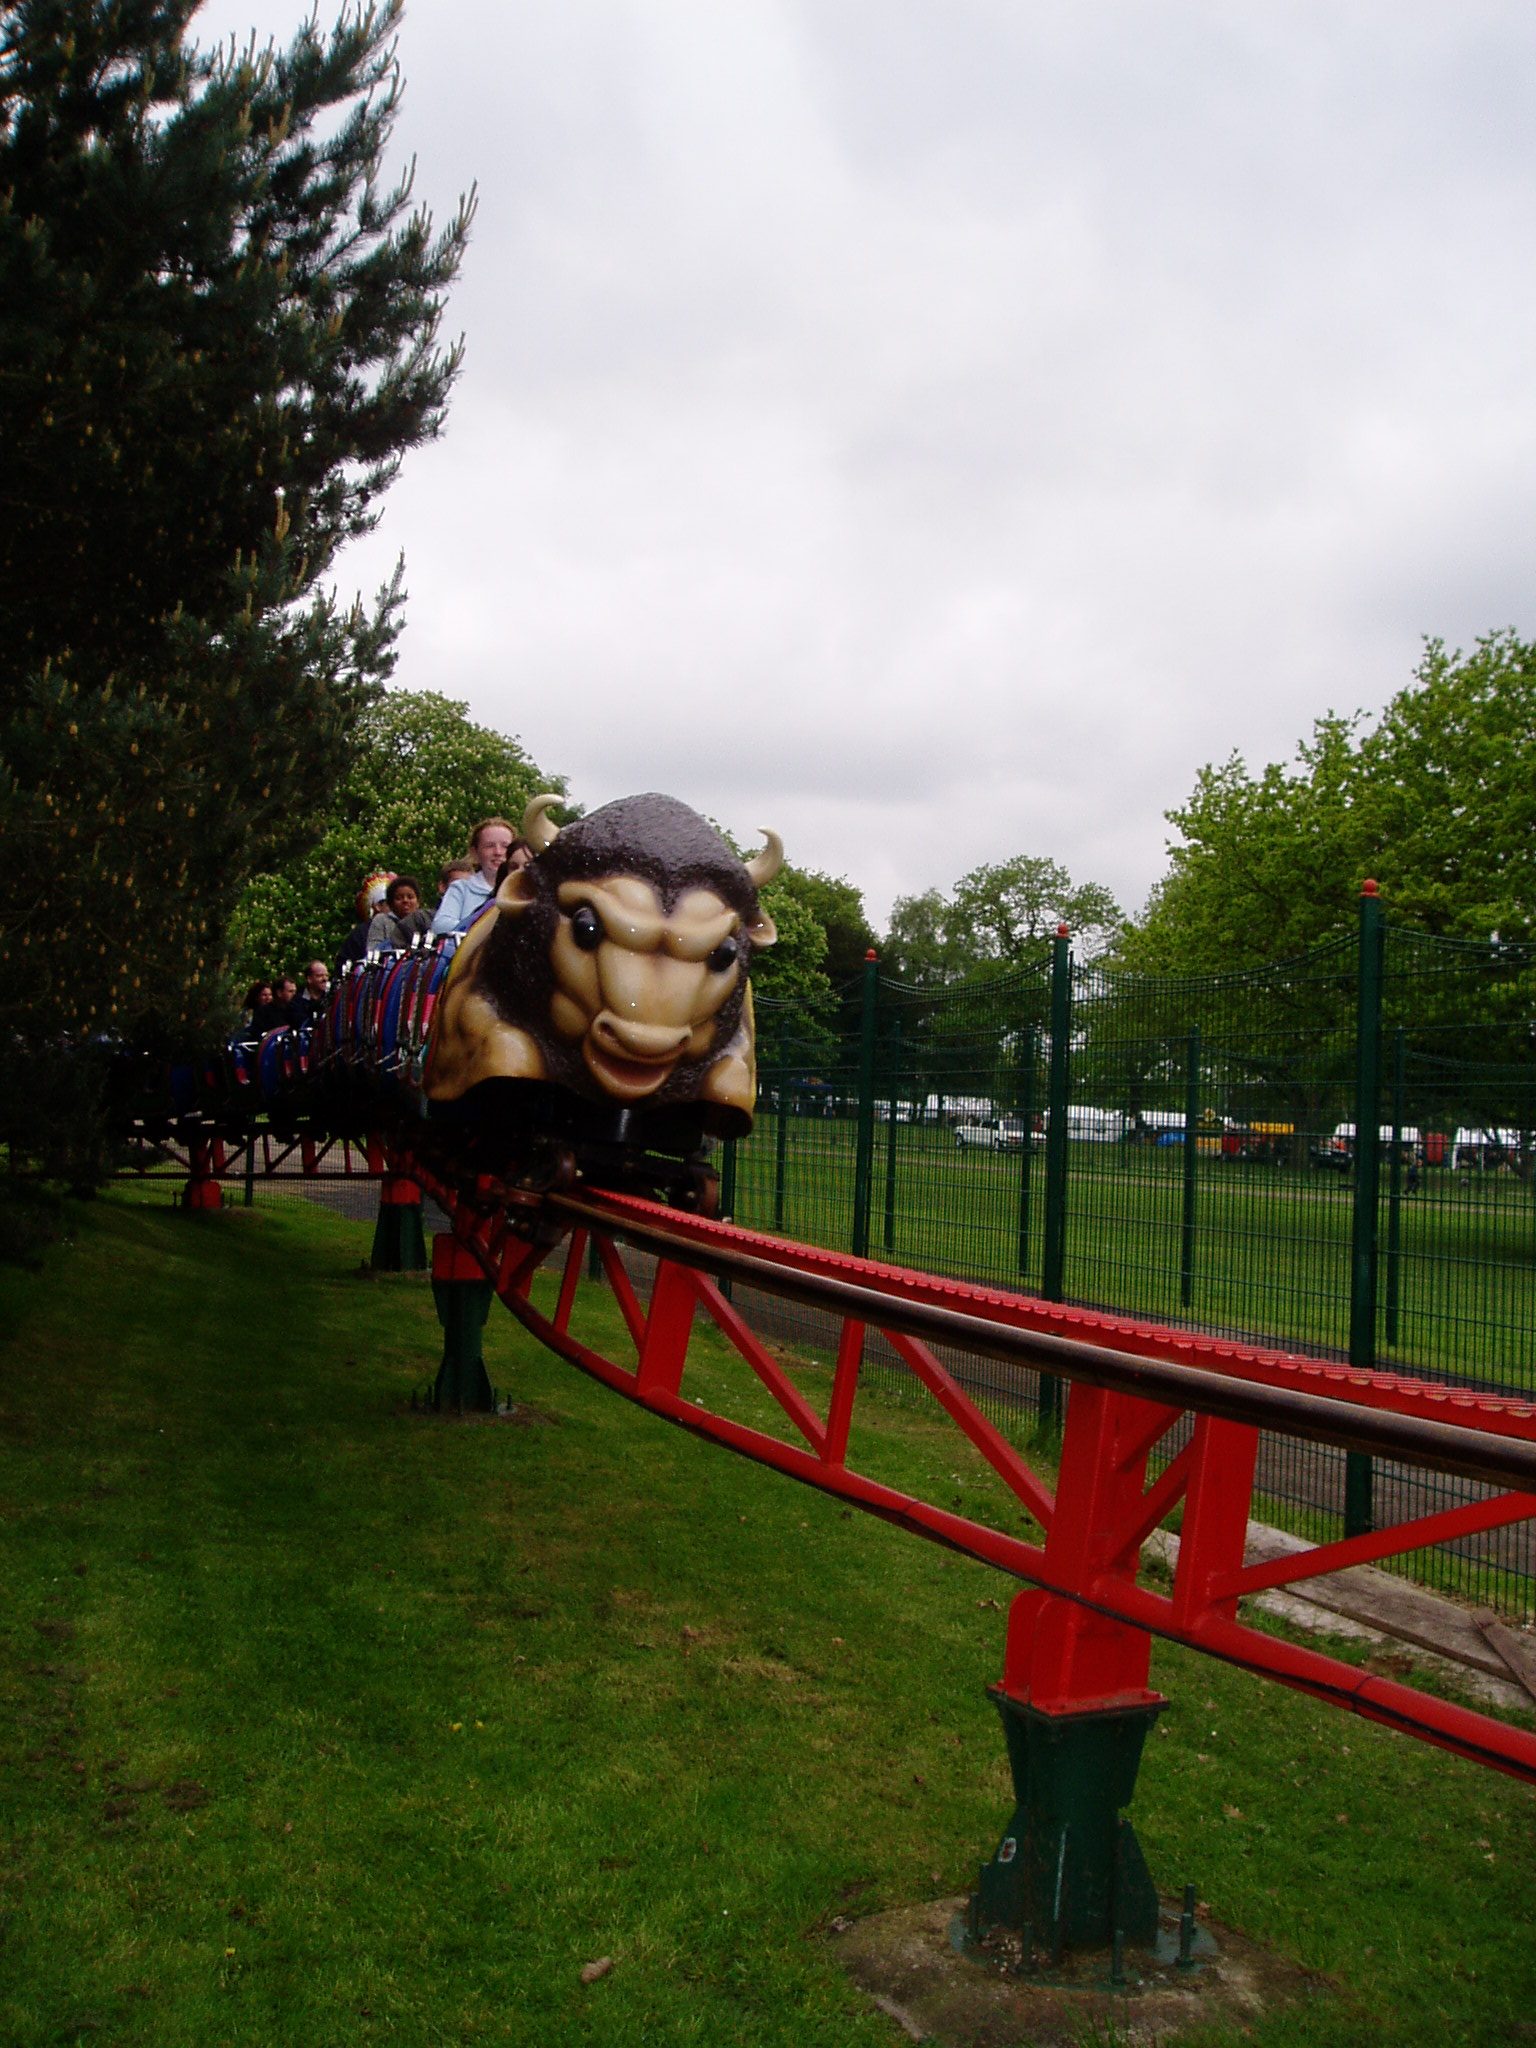 You are currently viewing Buffalo Mountain Coaster (Drayton Manor)